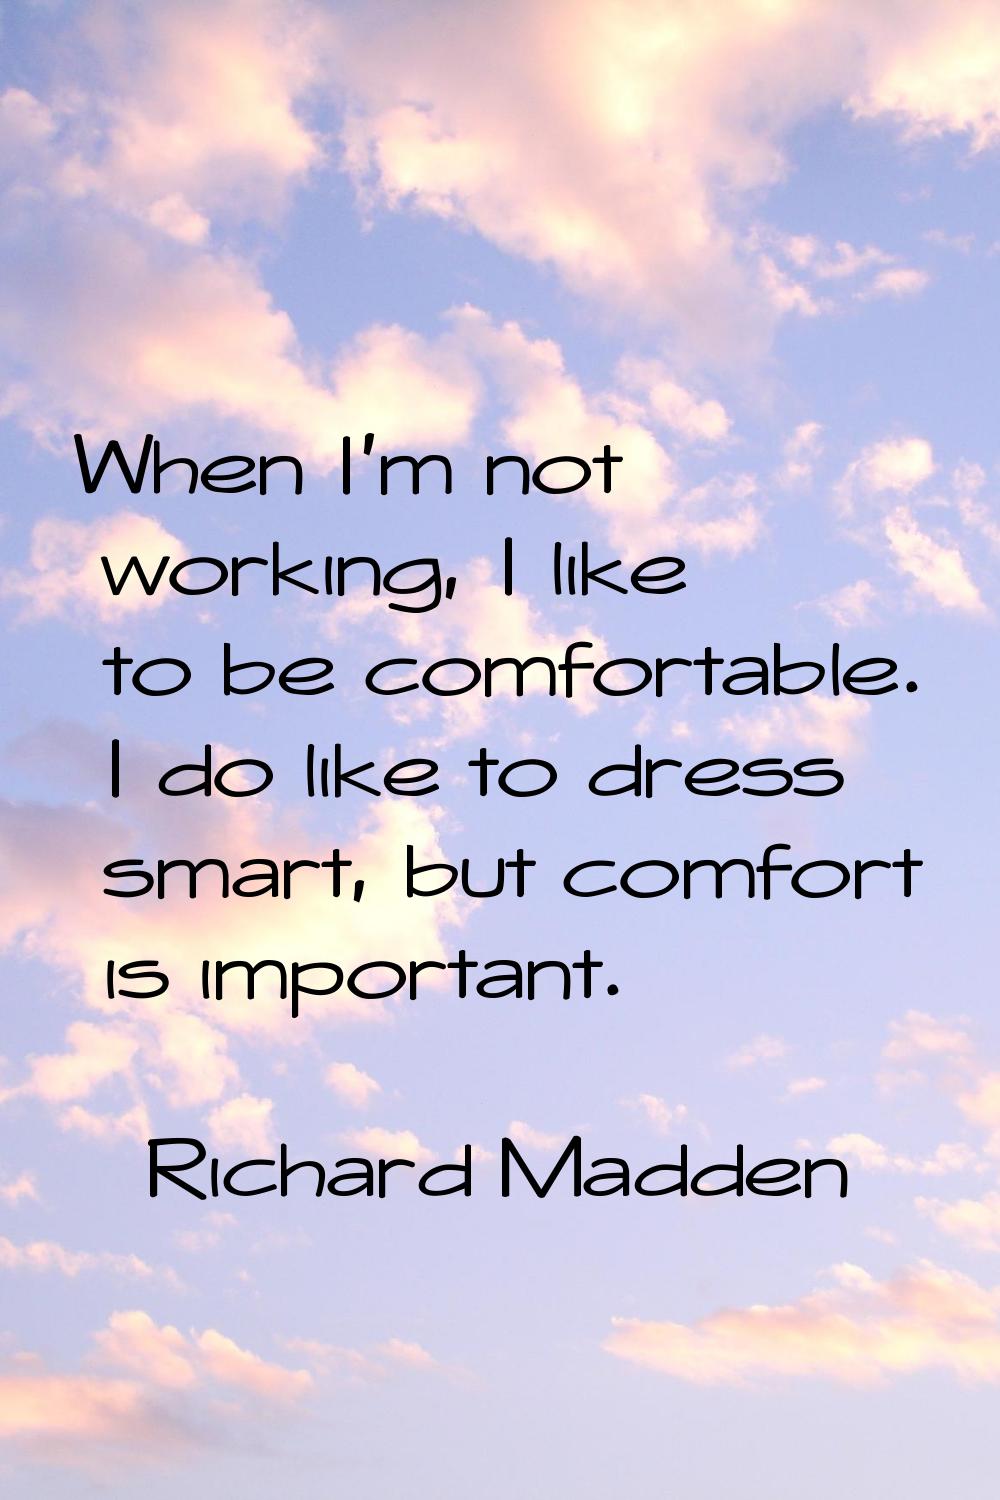 When I'm not working, I like to be comfortable. I do like to dress smart, but comfort is important.